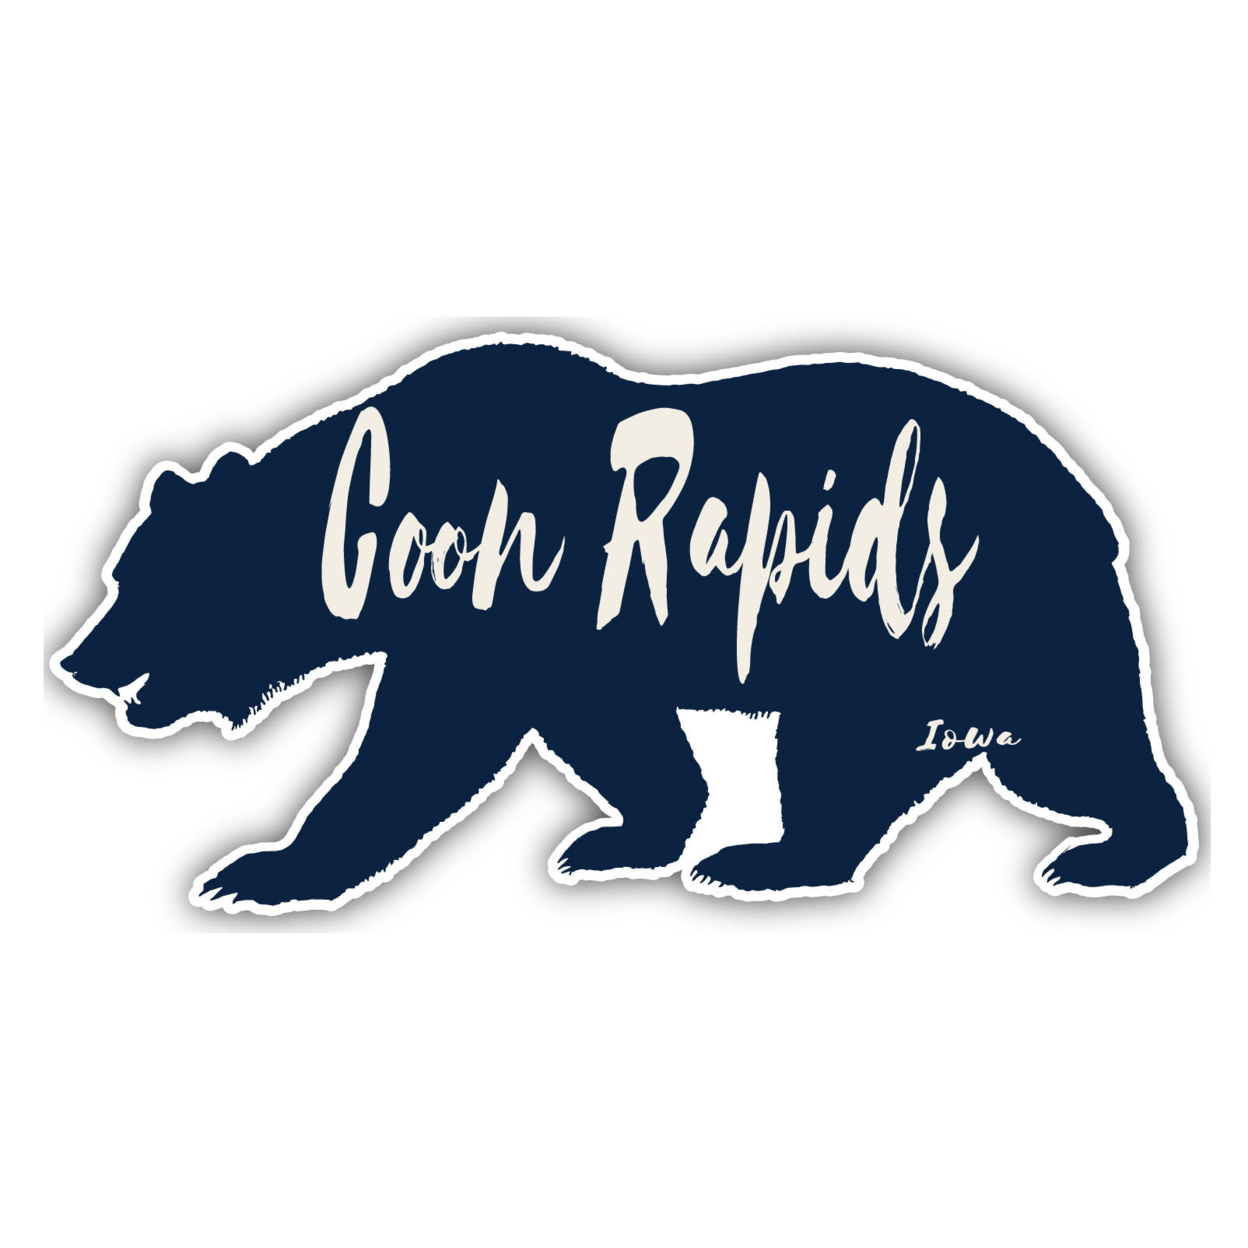 Coon Rapids Iowa Souvenir Decorative Stickers (Choose Theme And Size) - 4-Pack, 2-Inch, Bear